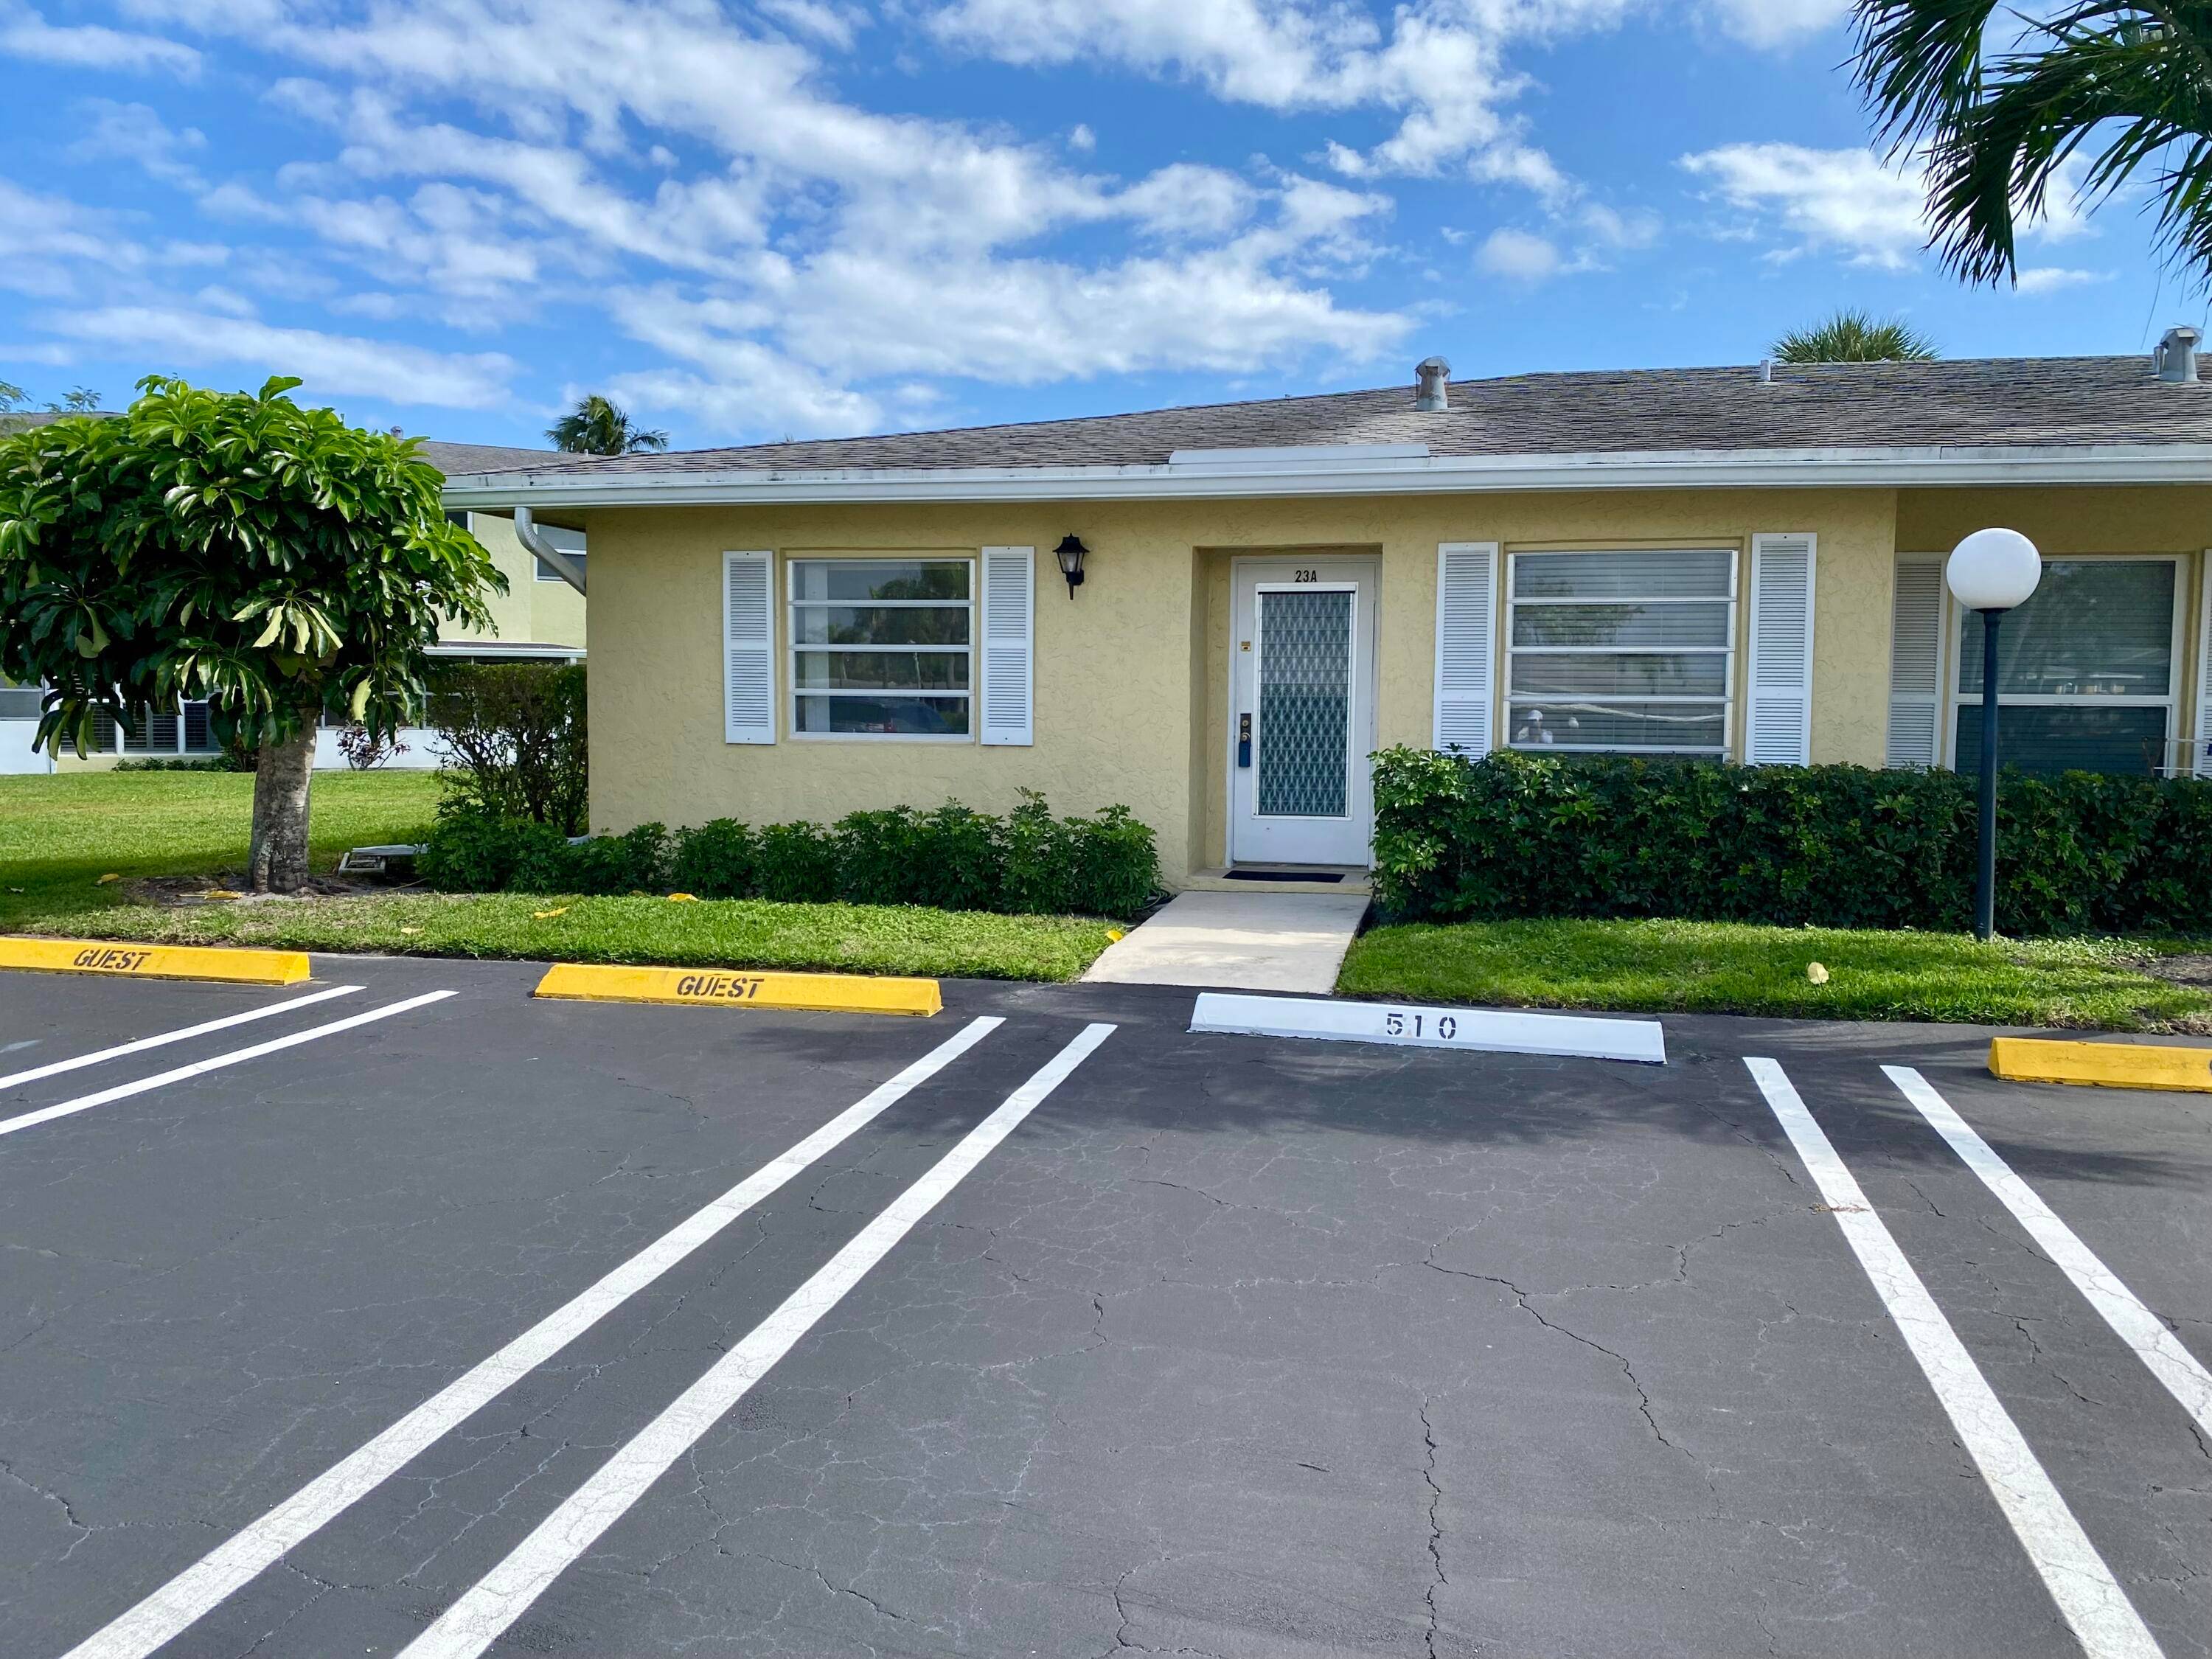 PINES OF DELRAY. 2 bedroom 2 bath 1167 square foot CORNER VILLA with a rarely available 318 square foot wrap around screened patio with the sought after SOUTHEAST EXPOSURE.